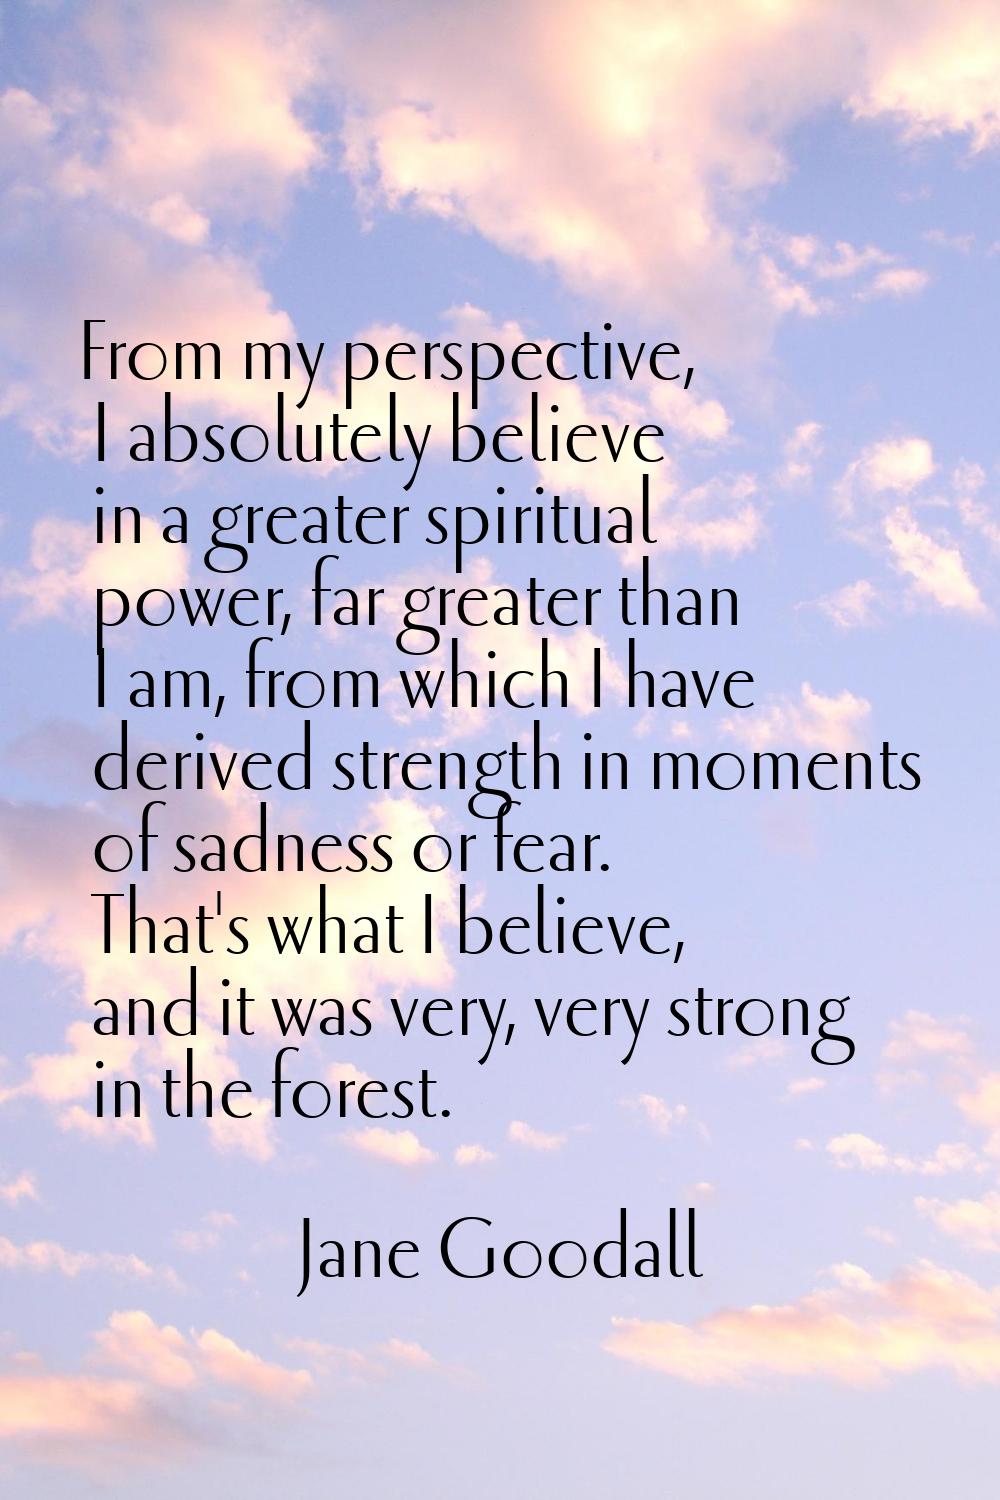 From my perspective, I absolutely believe in a greater spiritual power, far greater than I am, from